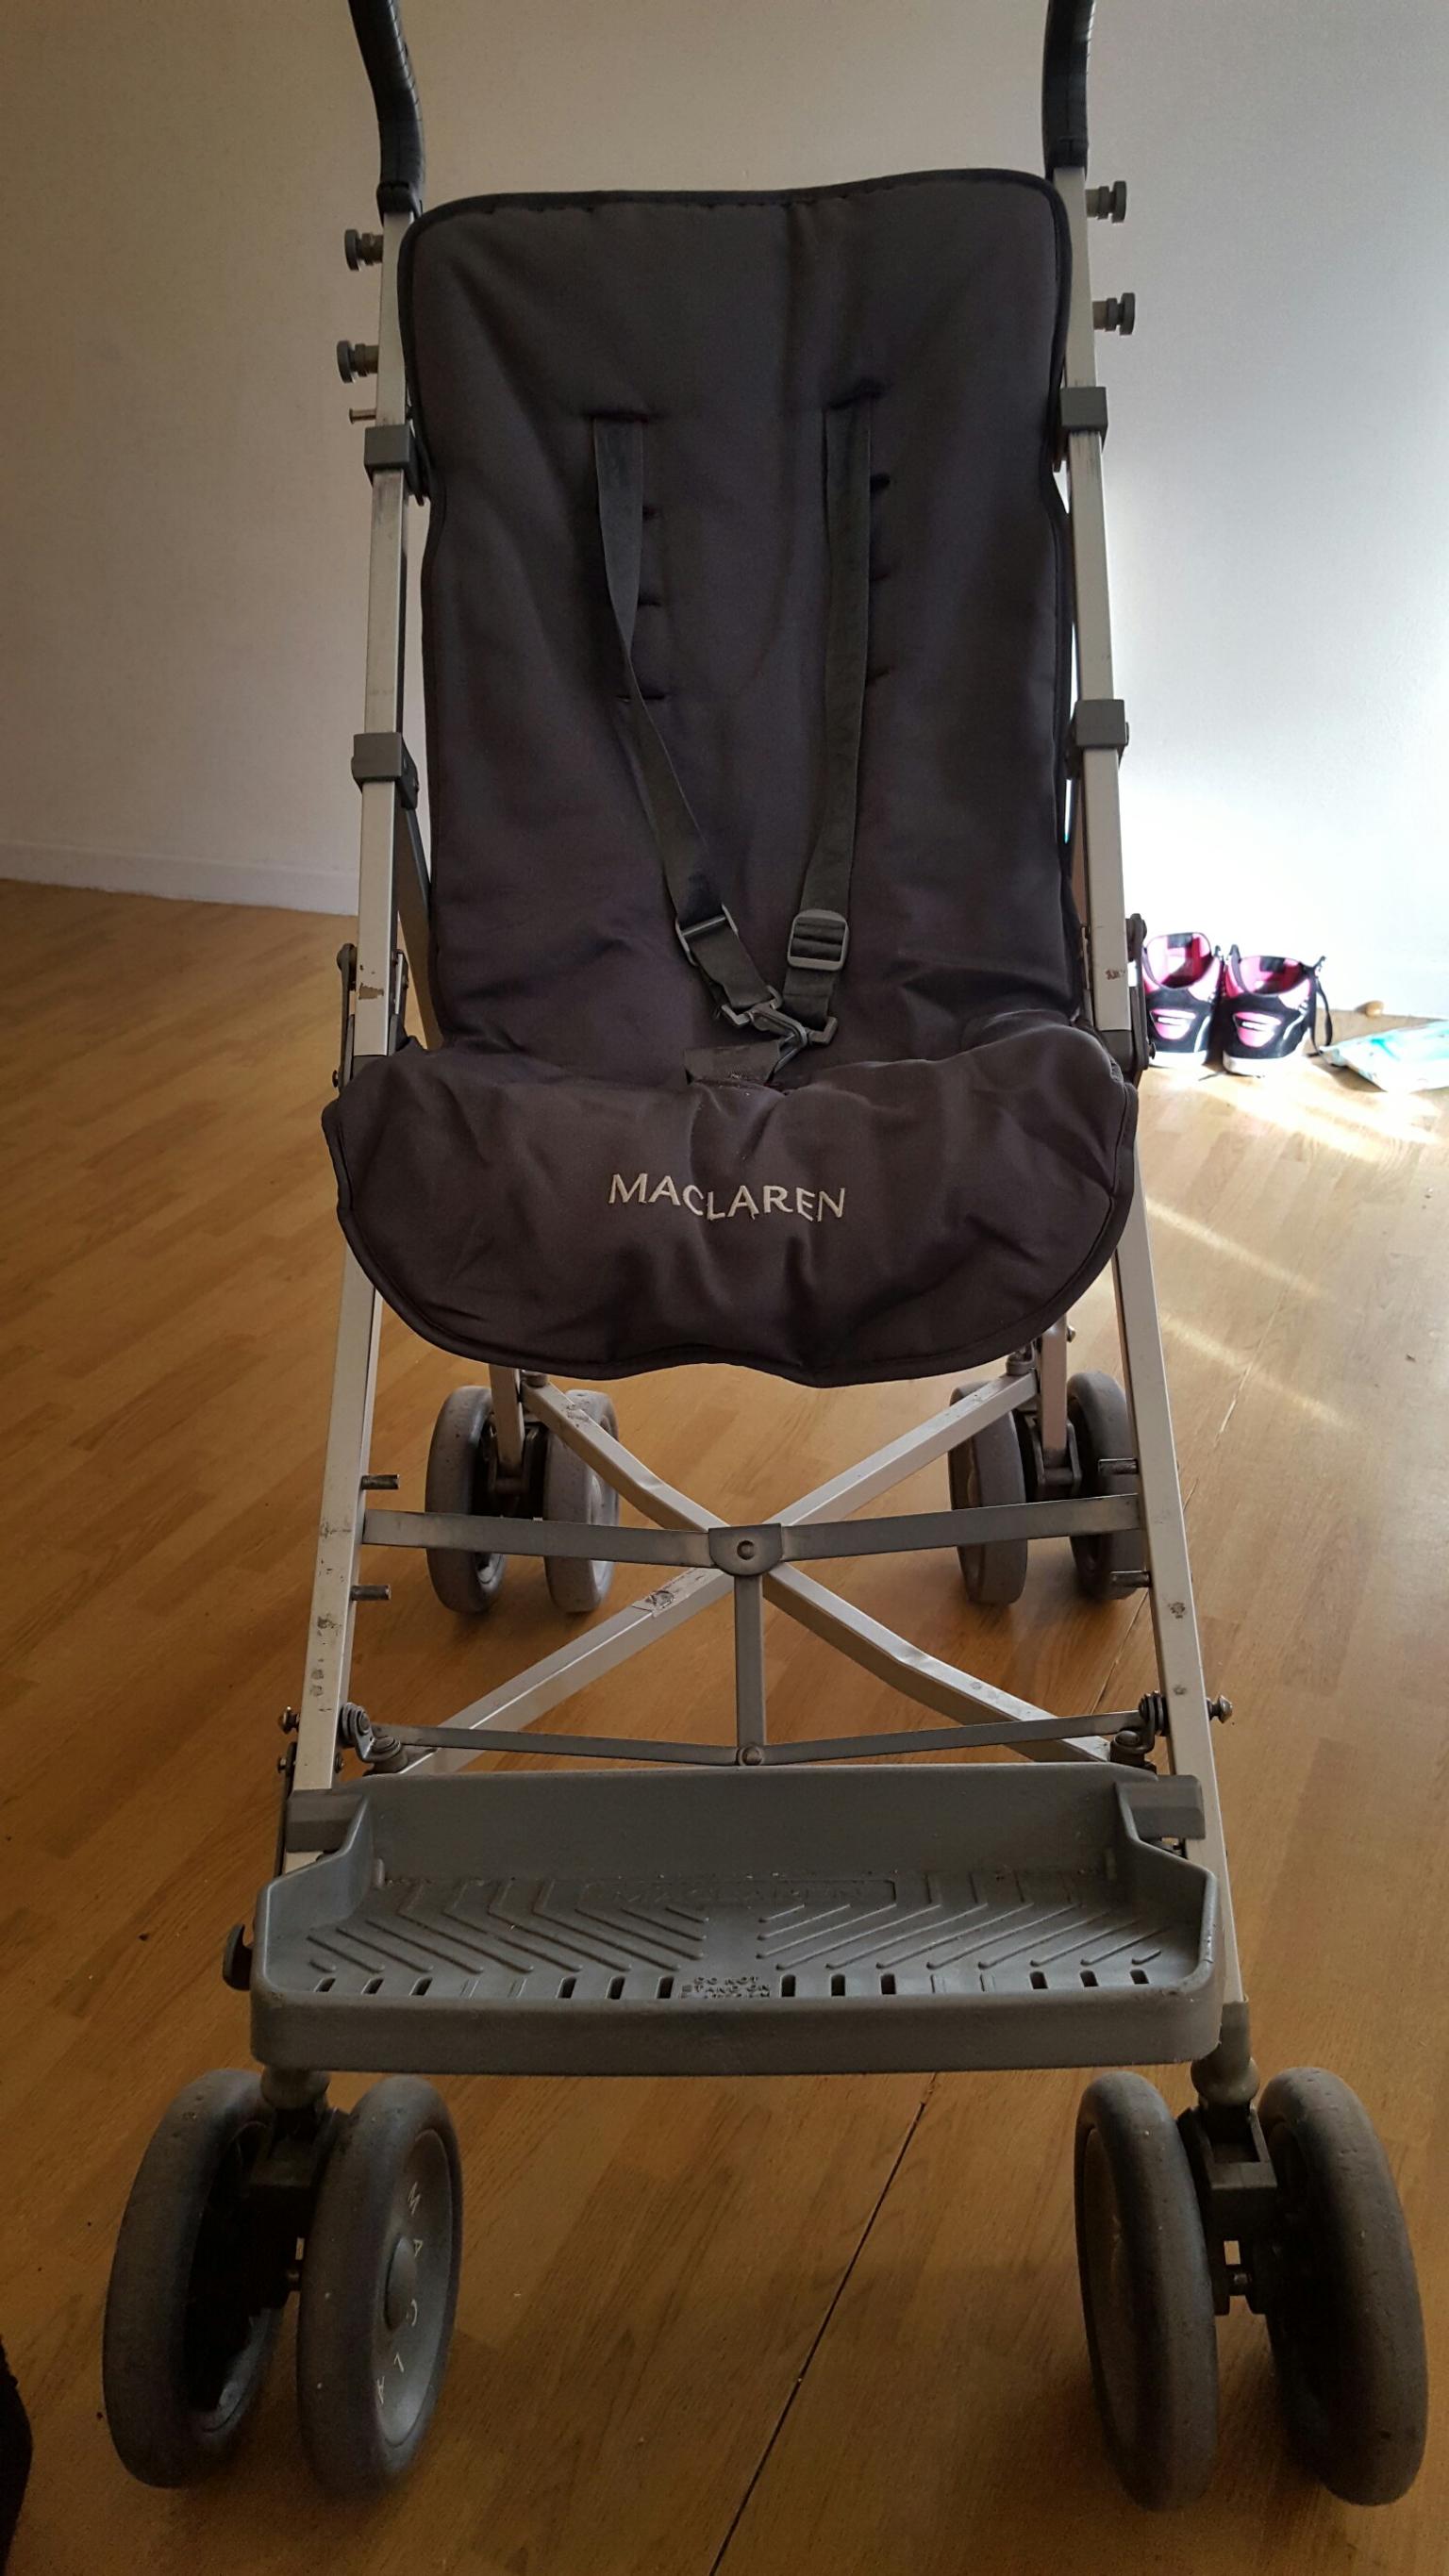 special needs stroller used